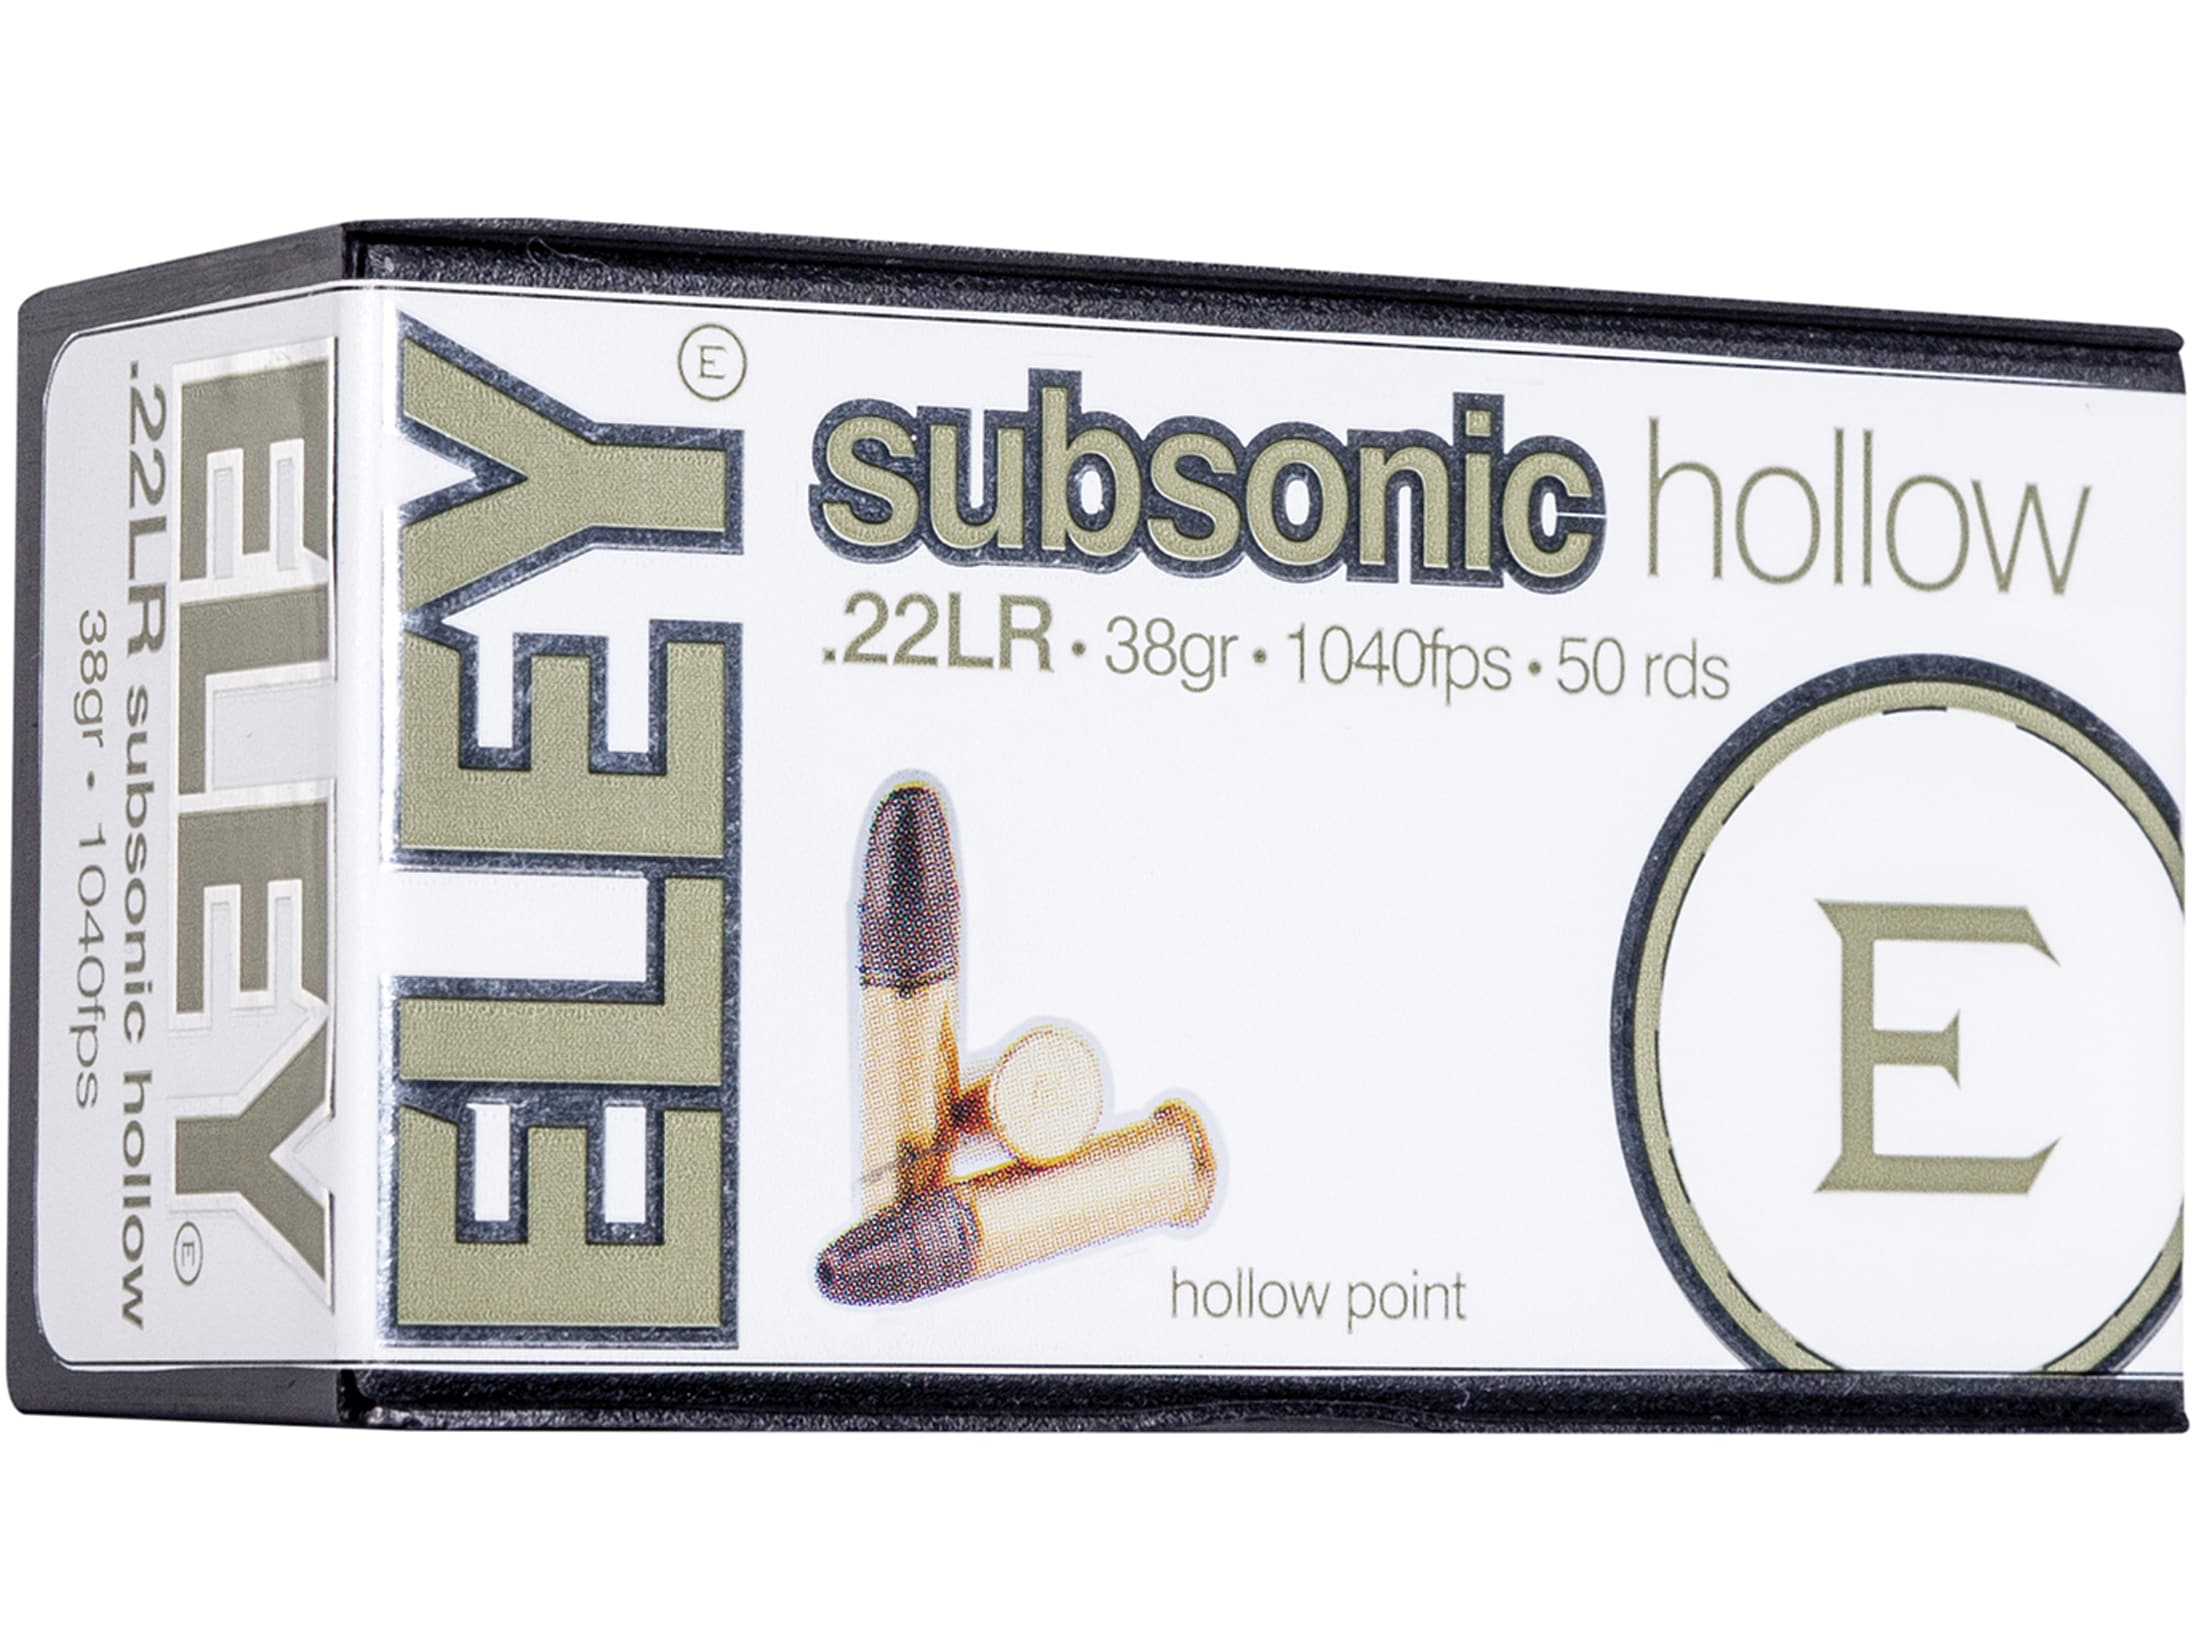 22 subsonic ammo for sale